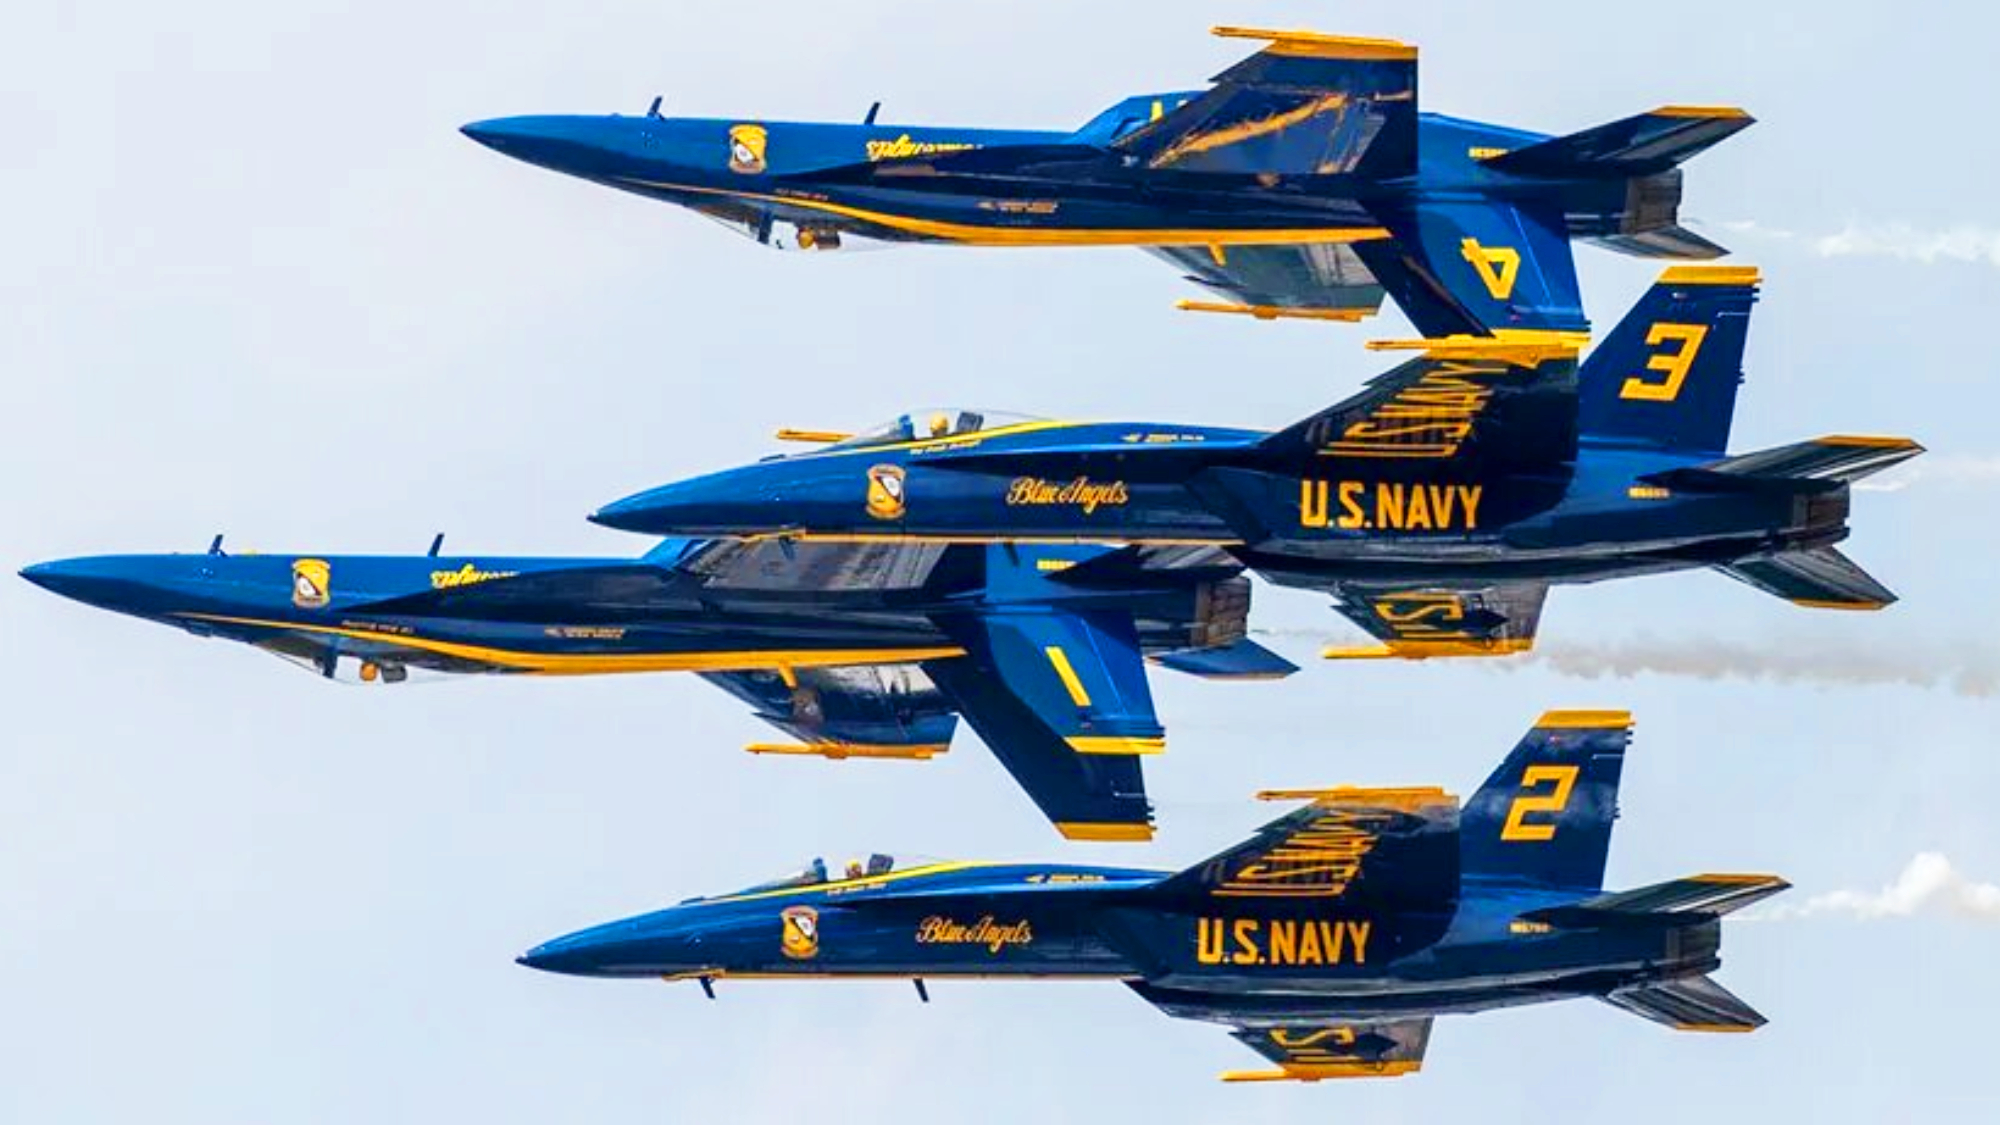 The Blue Angels flight squadron in the United States Navy